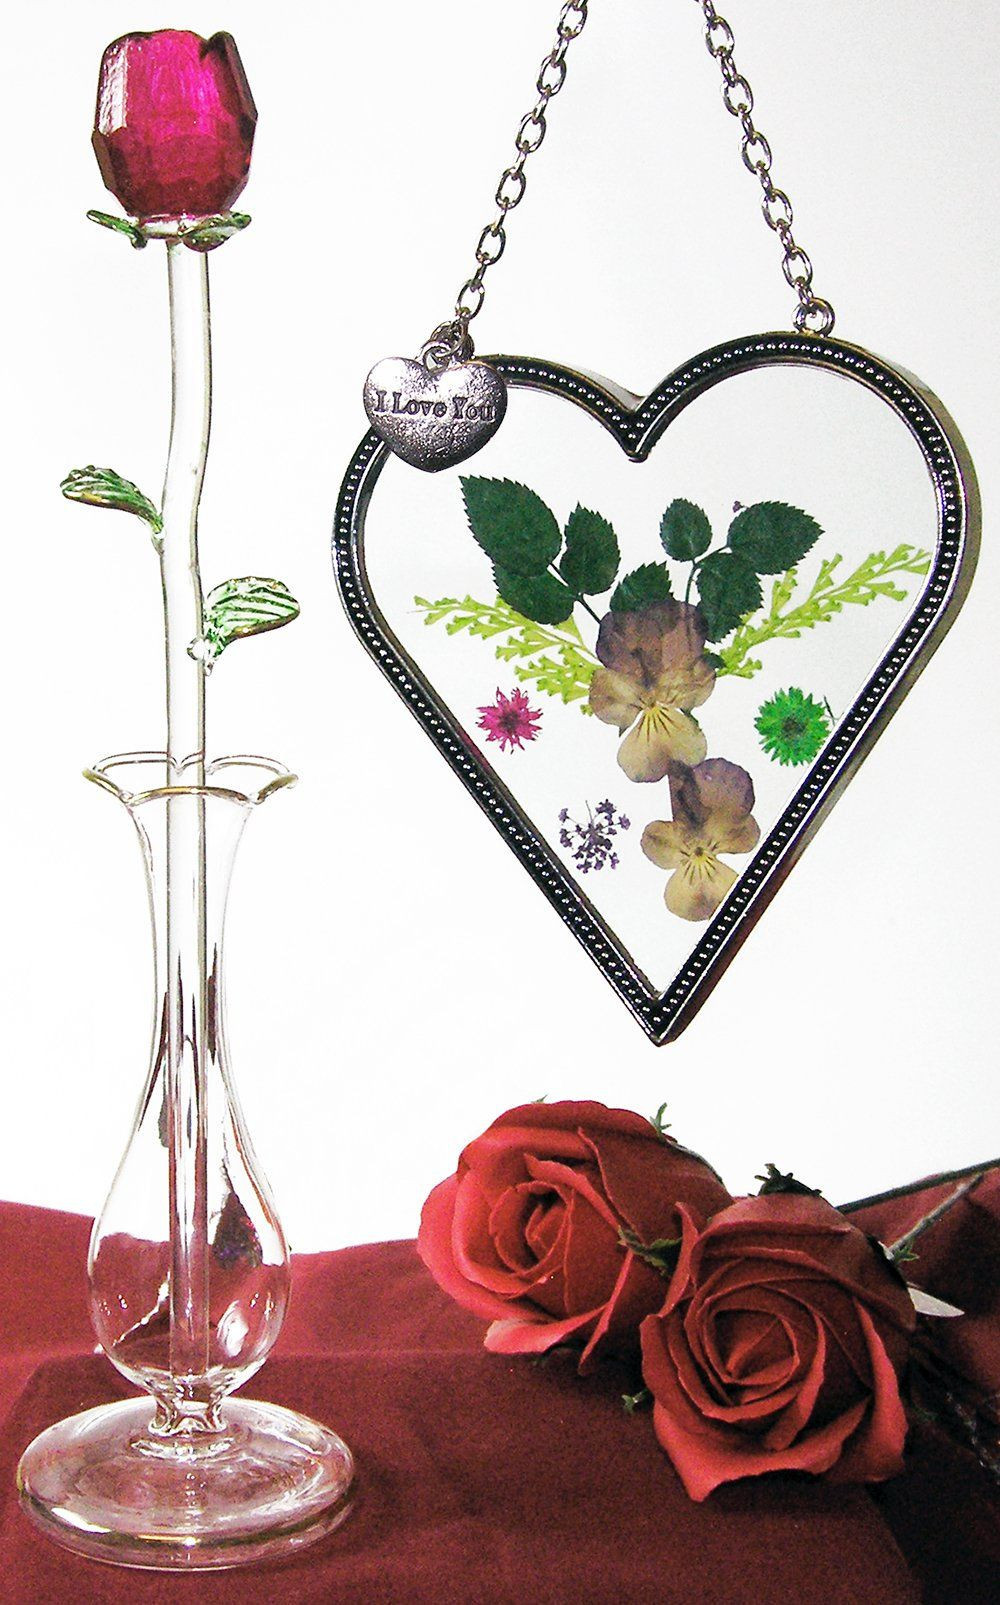 28 Lovable Mikasa atlantic Crystal Vase 2024 free download mikasa atlantic crystal vase of vases artificial plants collection page 30 with glass heart vase pics mother s day gift red glass rose and heart suncatcher forever of glass heart vase